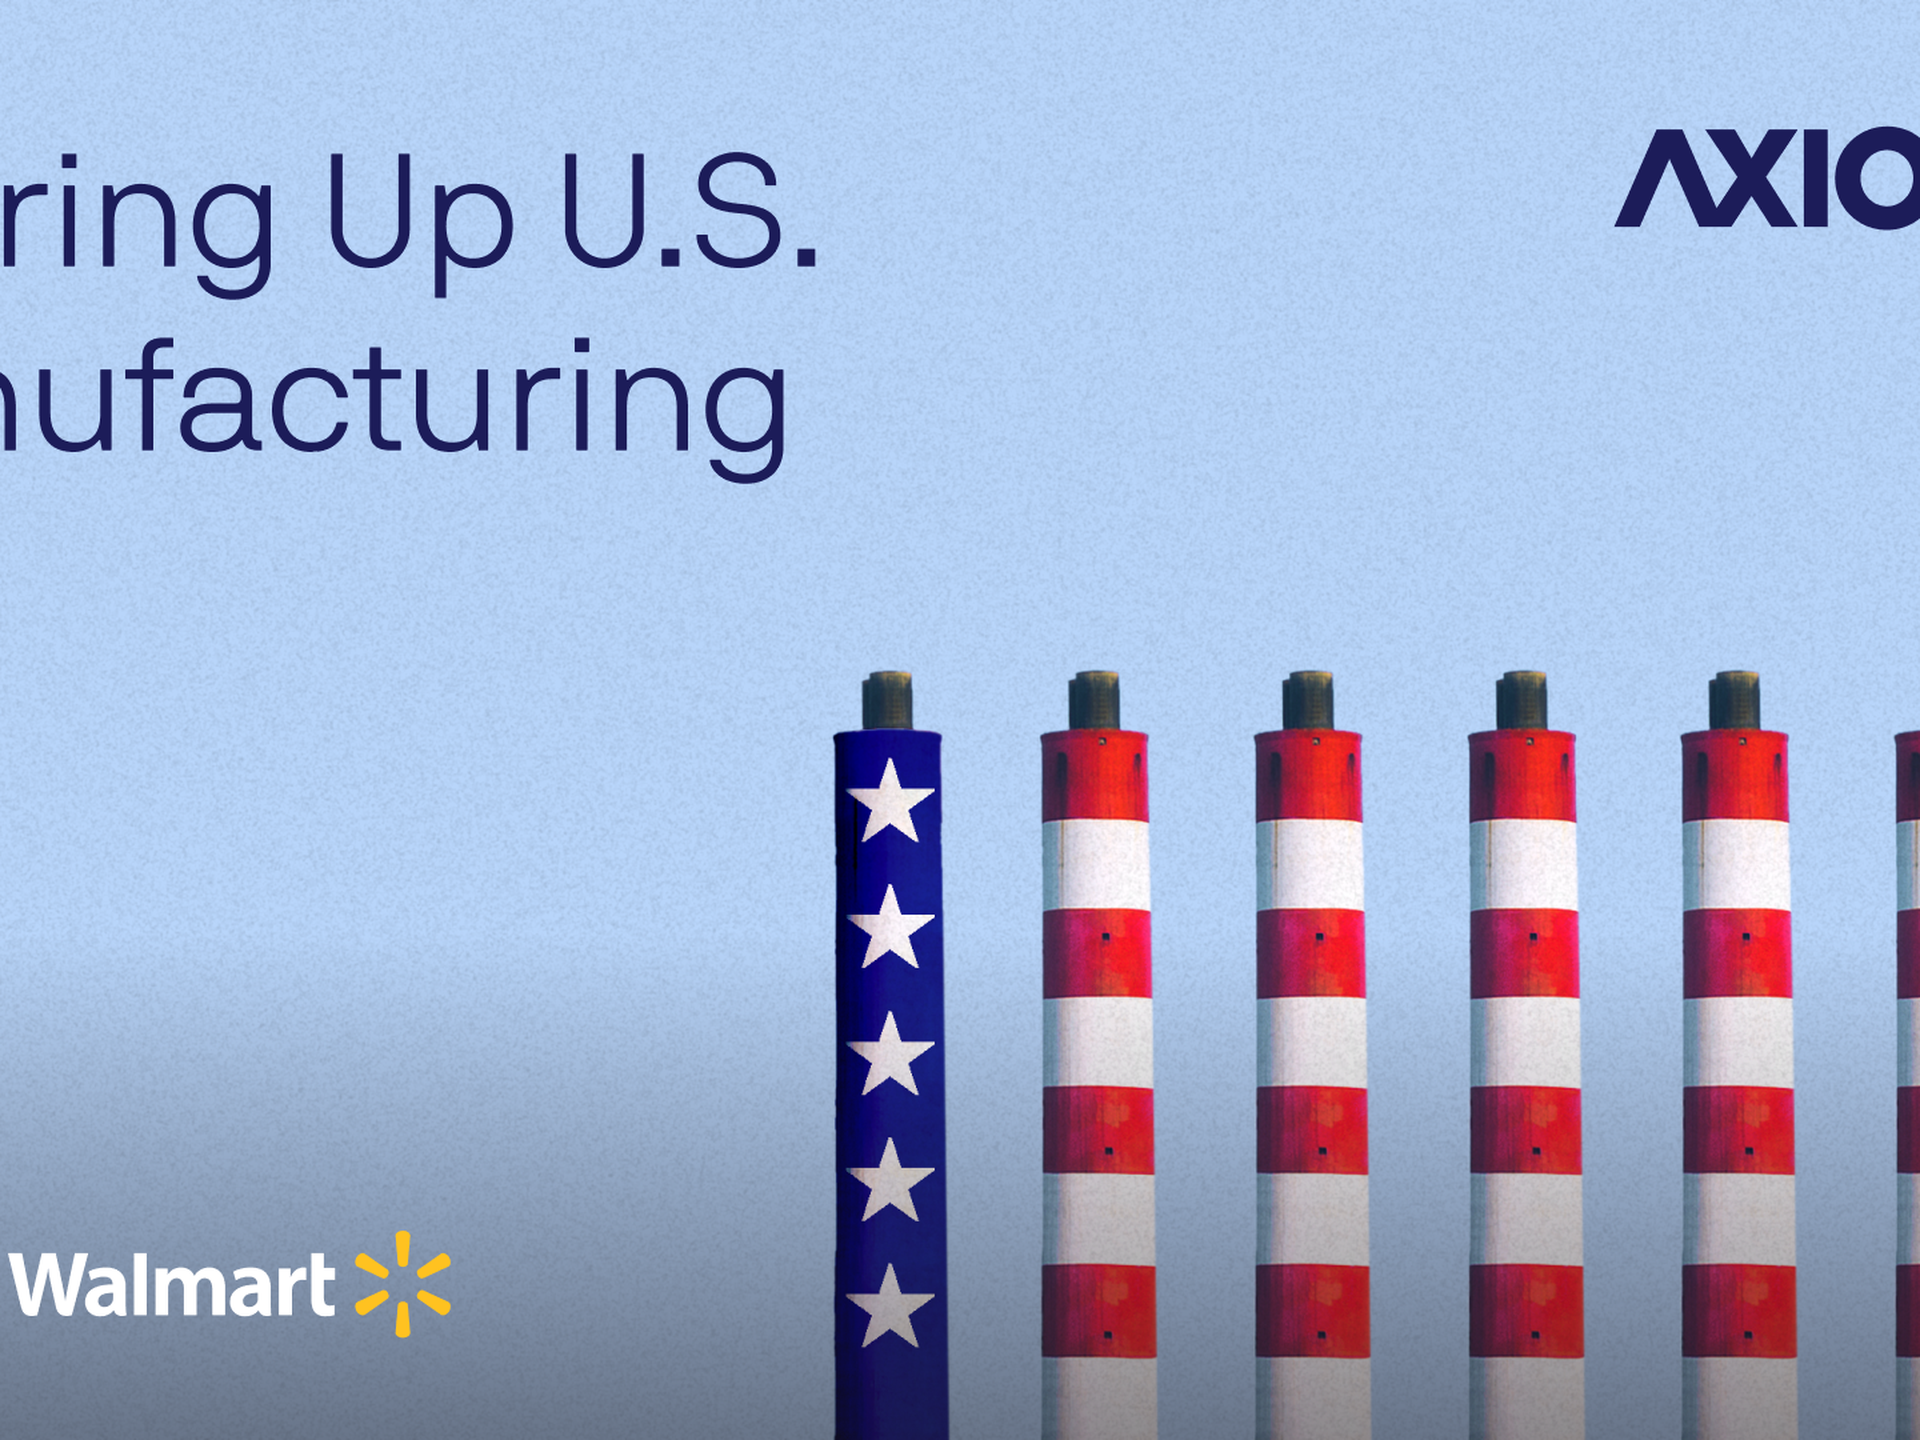 Watch: A conversation on improving U.S. manufacturing capabilities